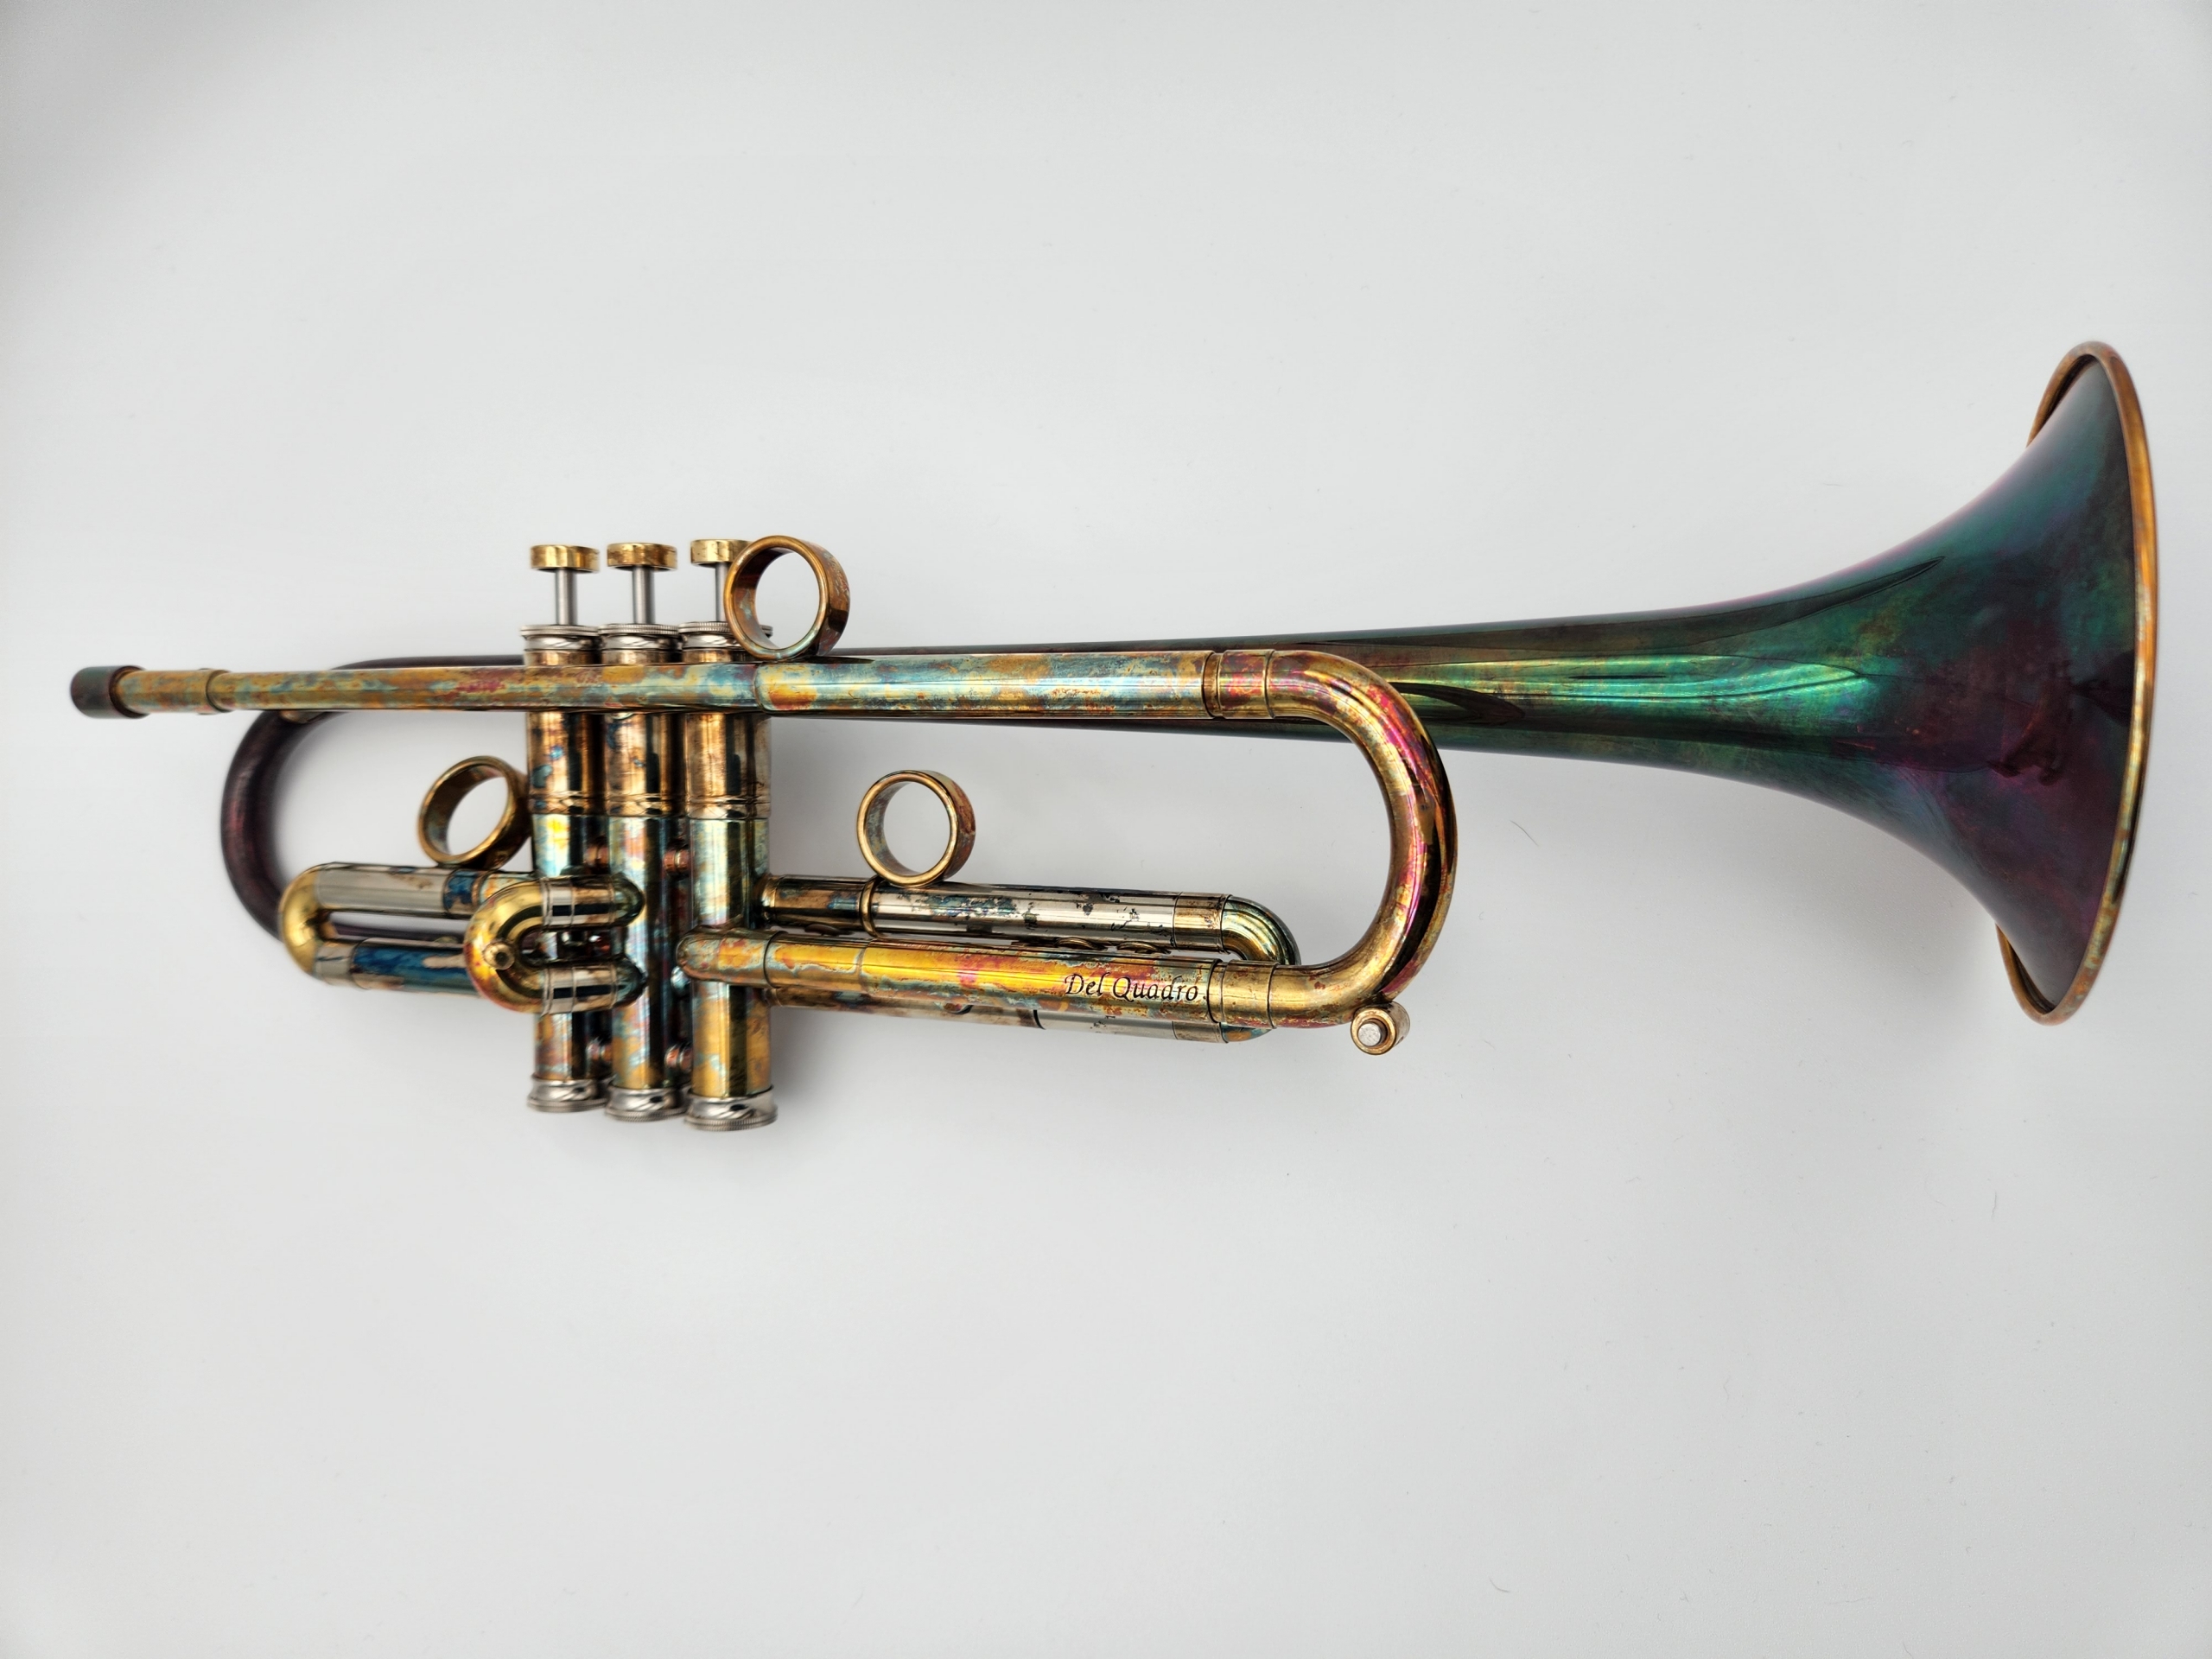 Del Quadro Custom Grizzly Trumpet in a Colorful Acid Burn Finish with Purple Chariot Button and Stopscrew Inlays